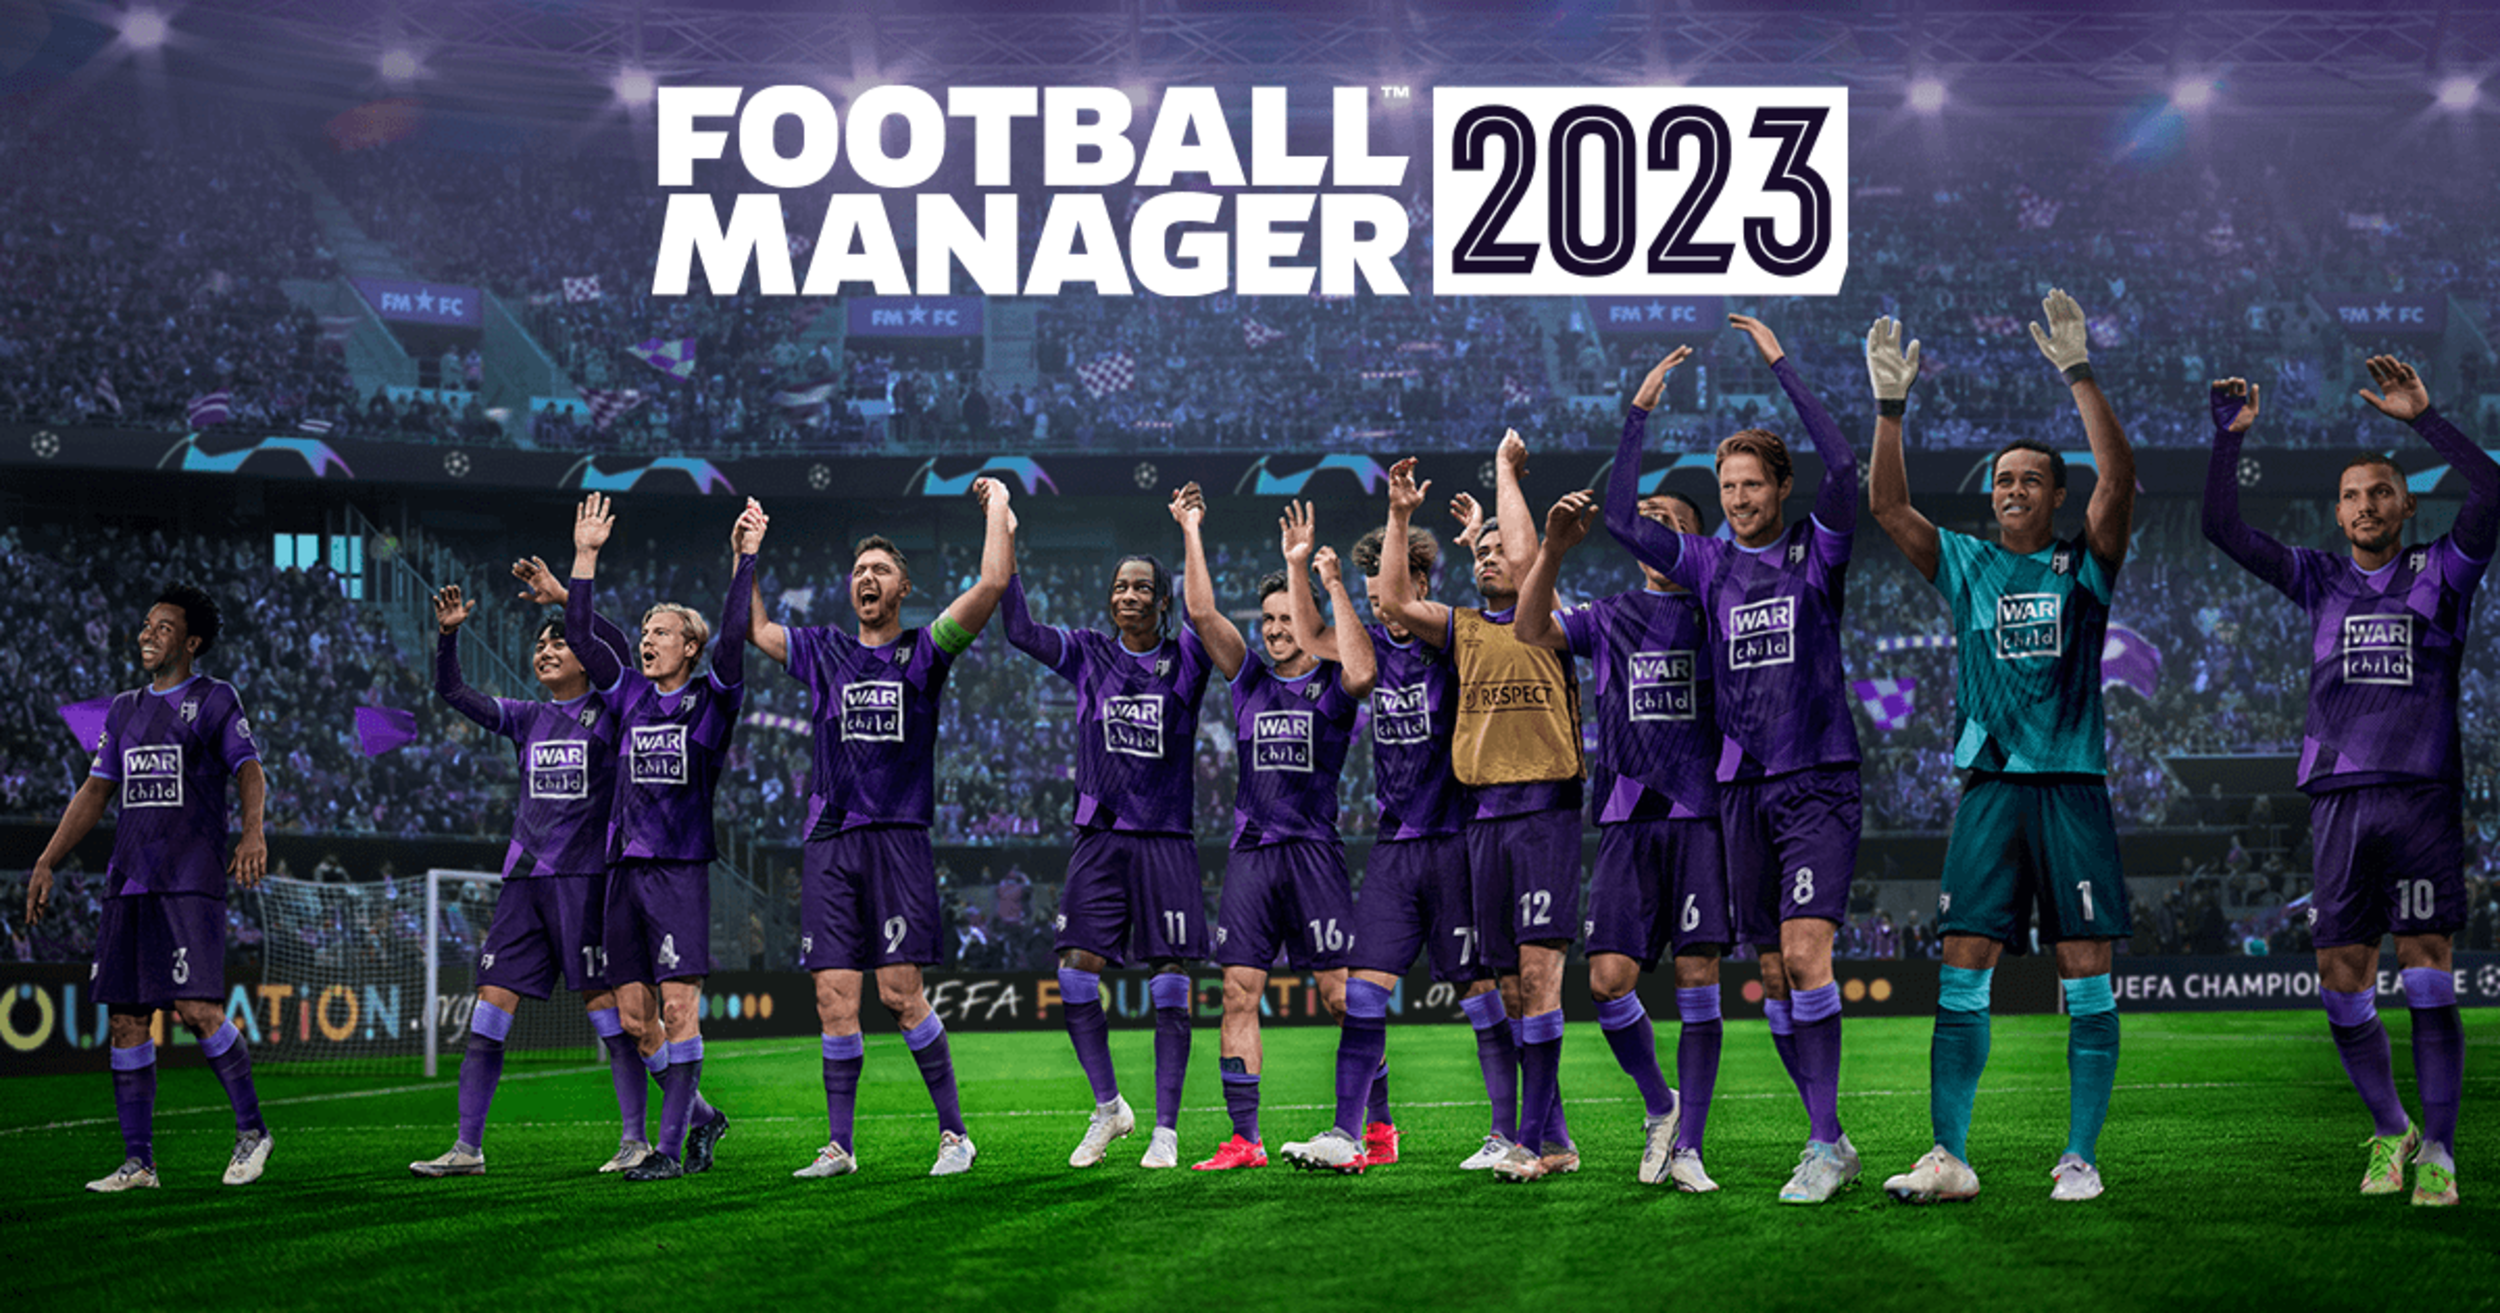 'Football Manager 2023'